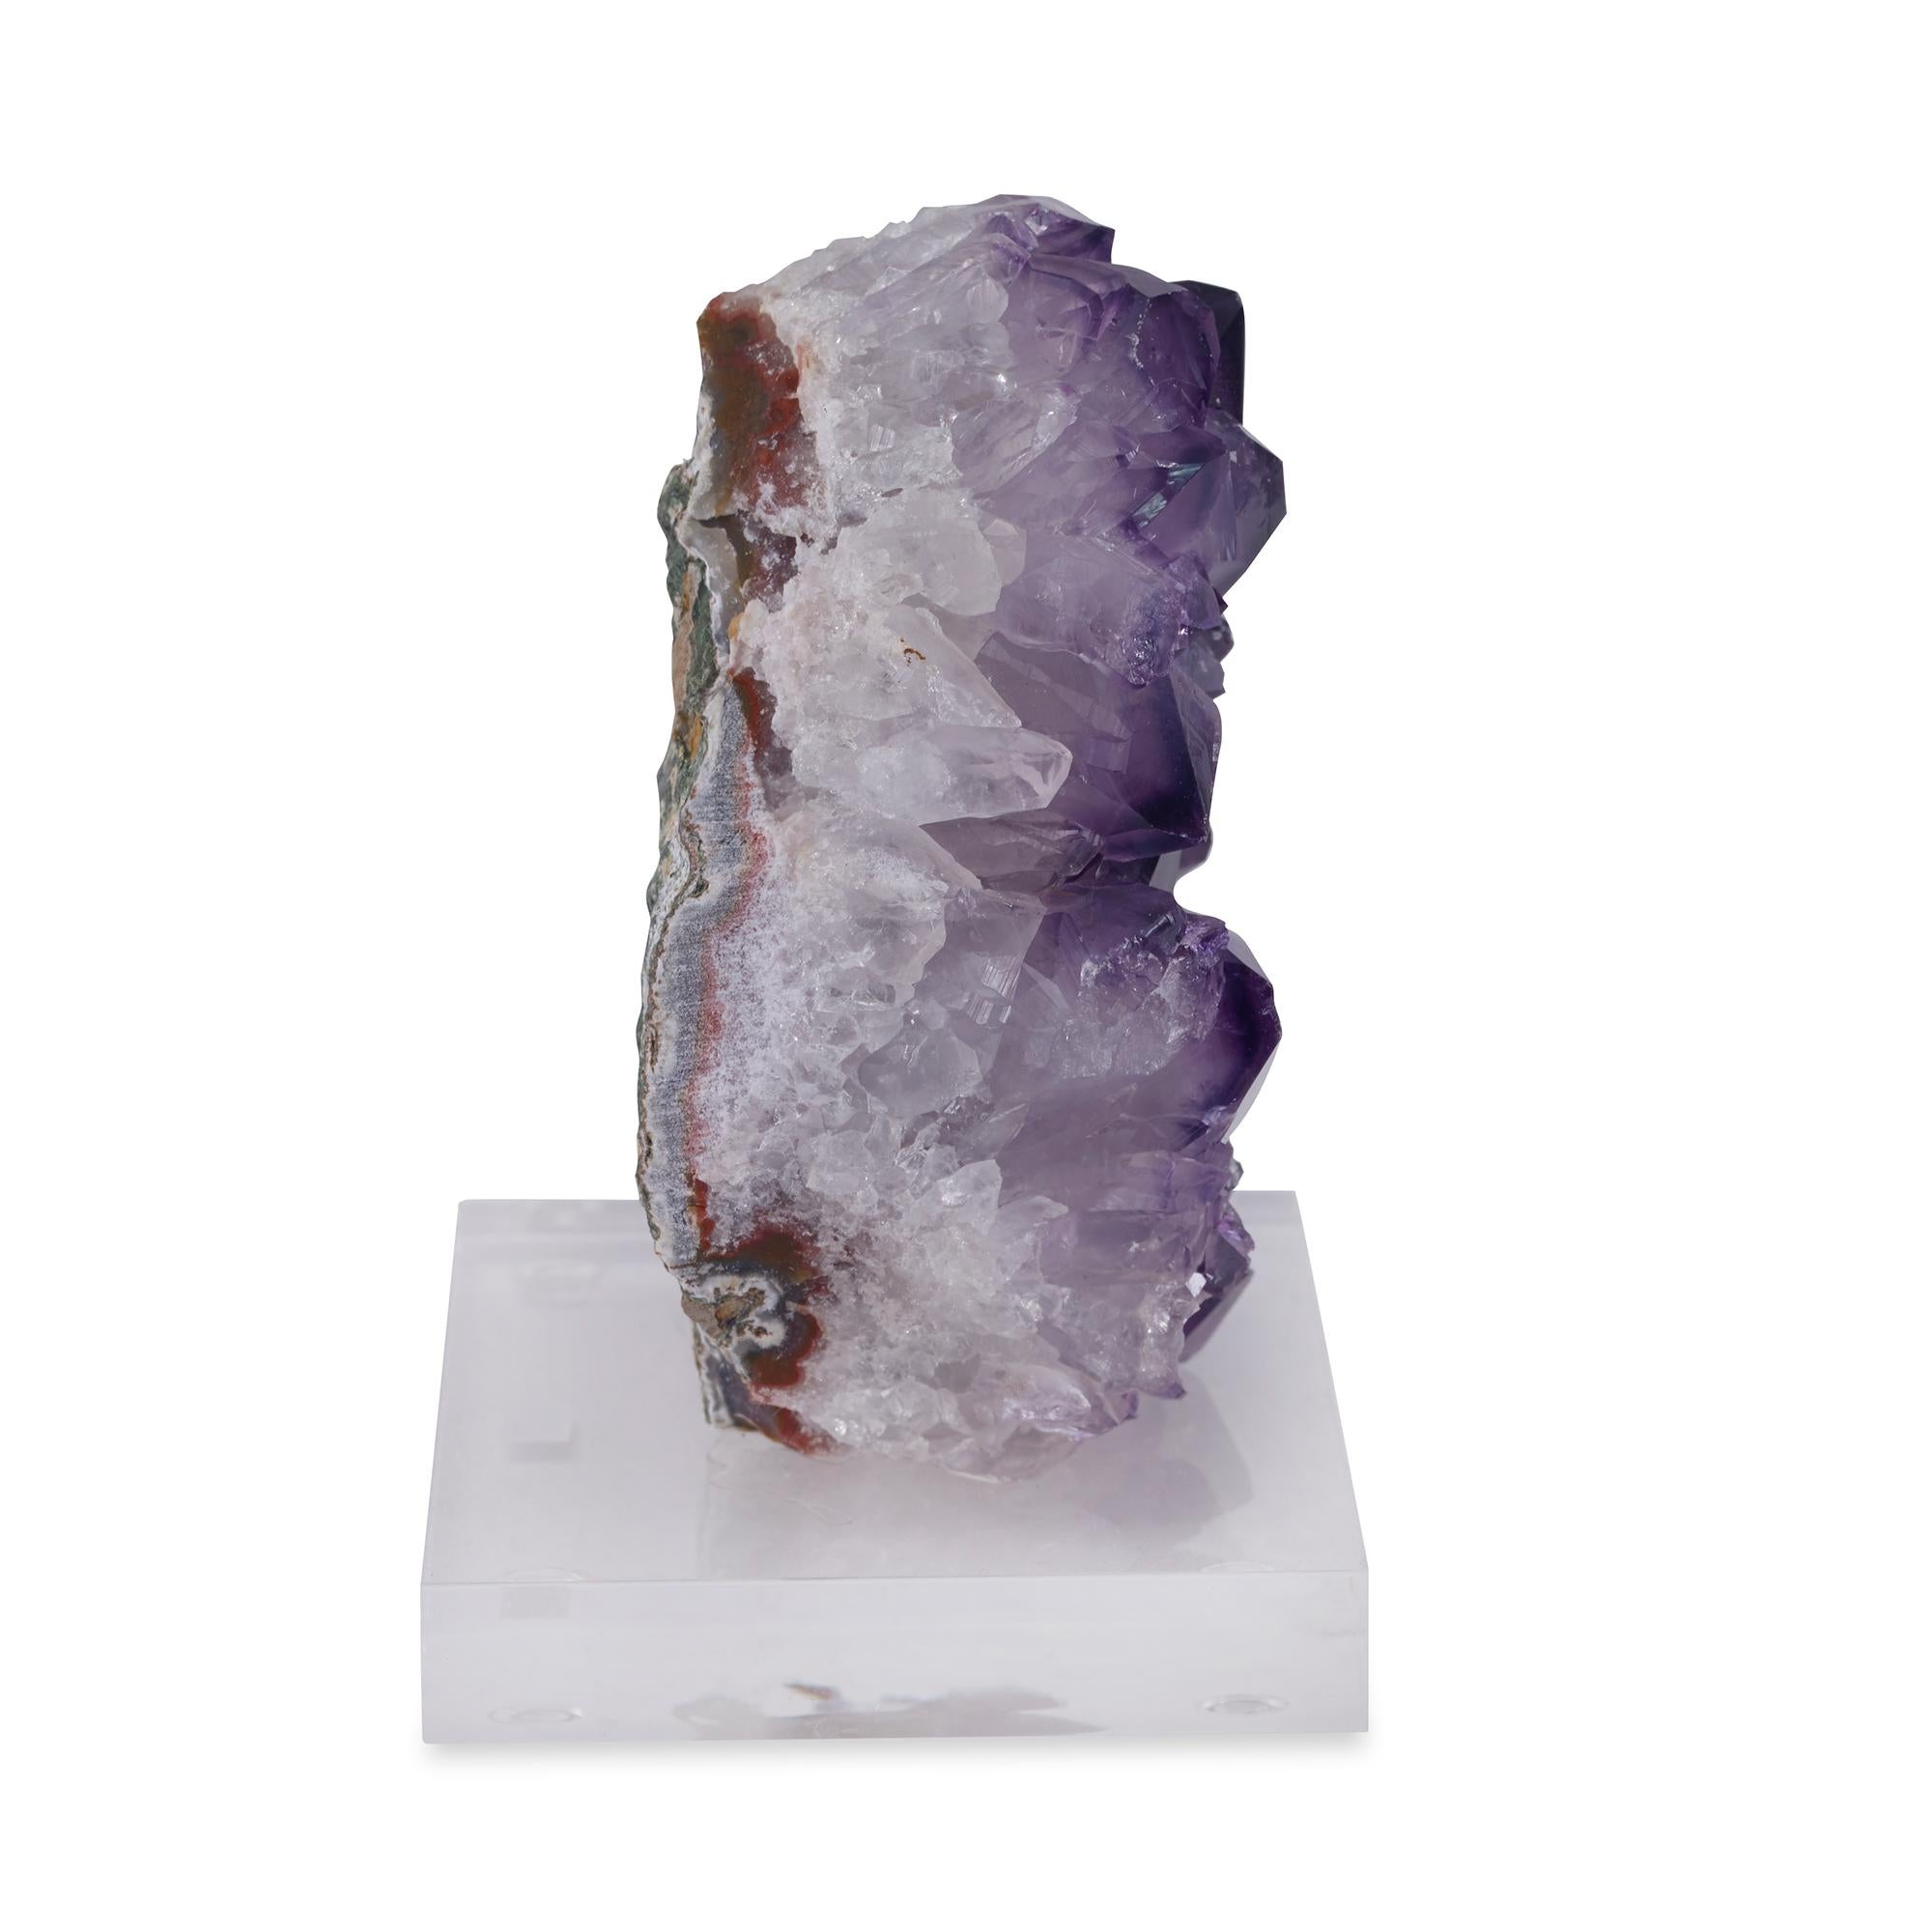 An amethyst druze mounted on a clear acrylic base. Due to the natural material, variation in size, shape, and color is to be expected.
      